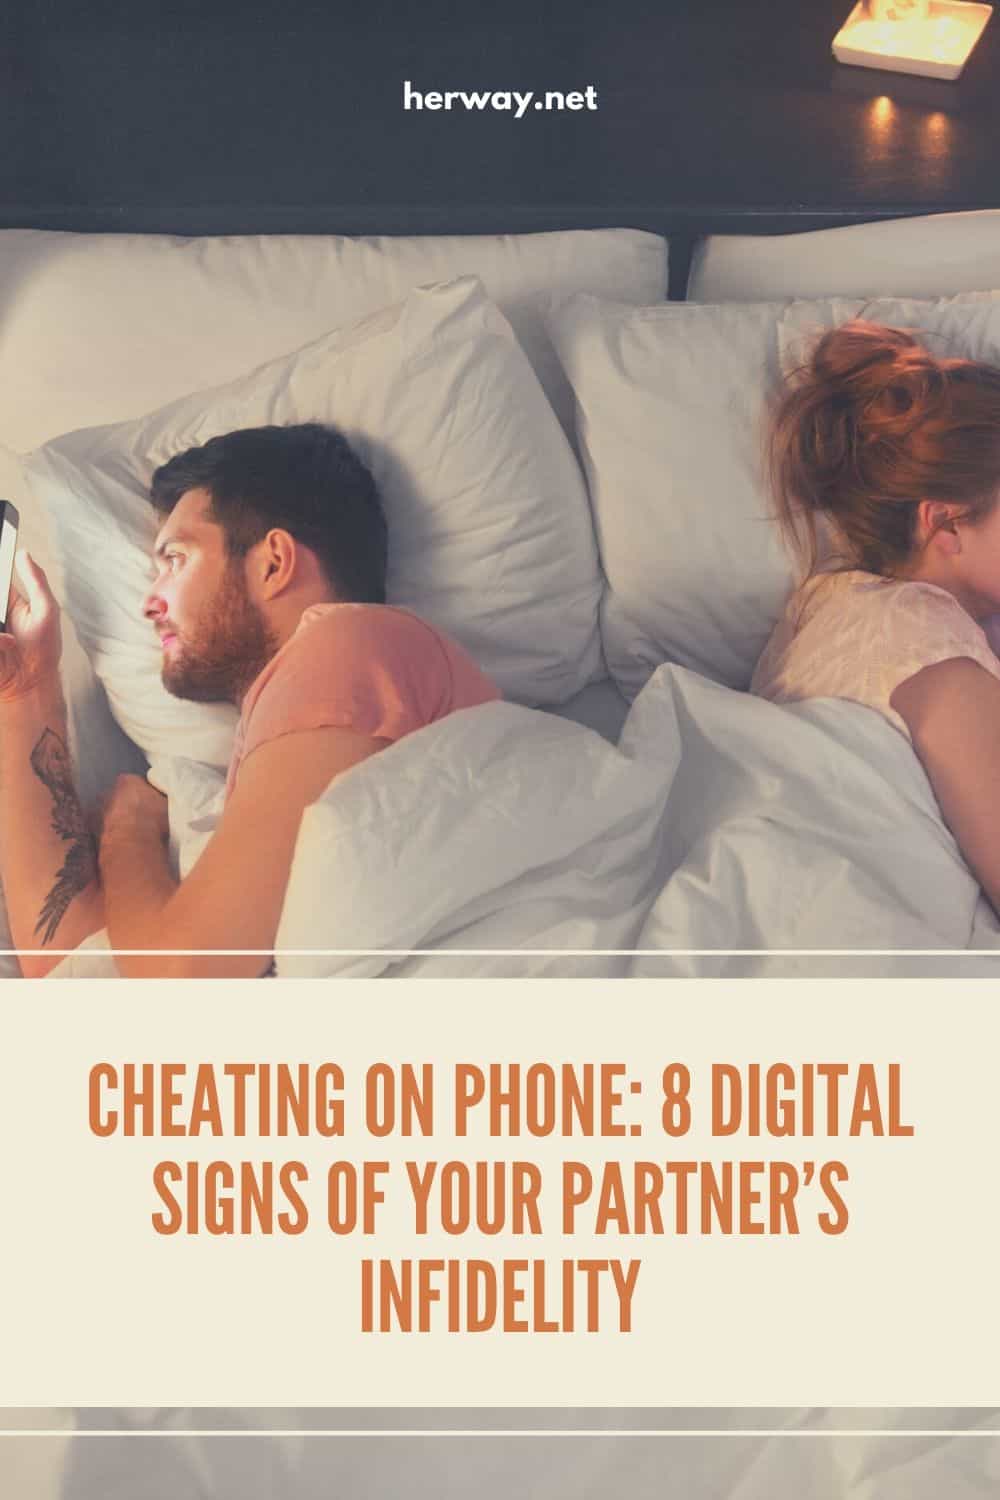 Cheating On Phone: 8 Digital Signs Of Your Partner's Infidelity